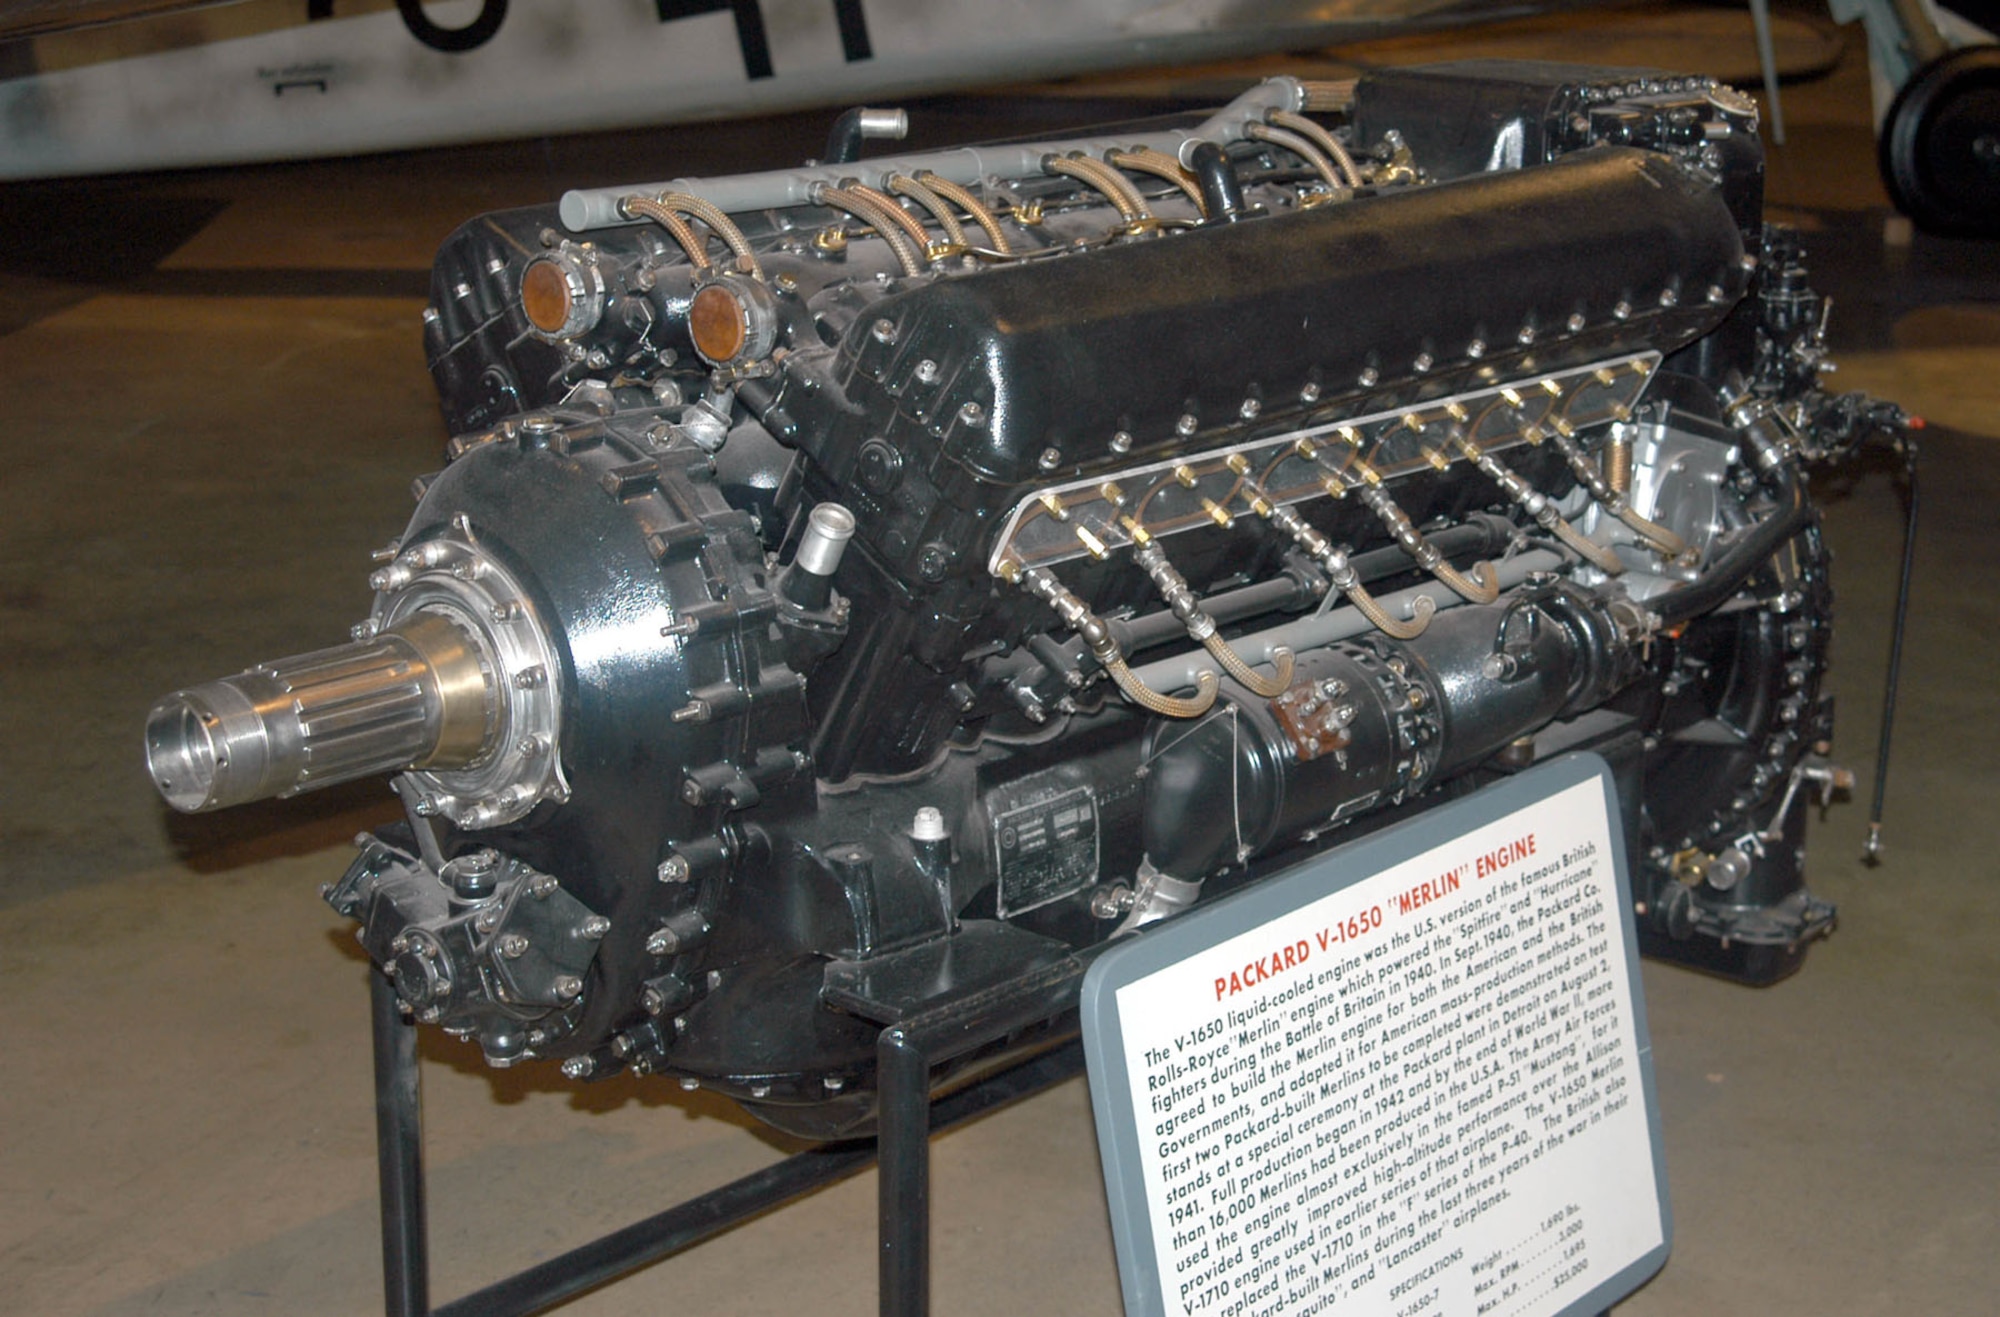 DAYTON, Ohio -- Packard V-1650 Merlin engine on display in the World War II Gallery at the National Museum of the United States Air Force. (U.S. Air Force photo)